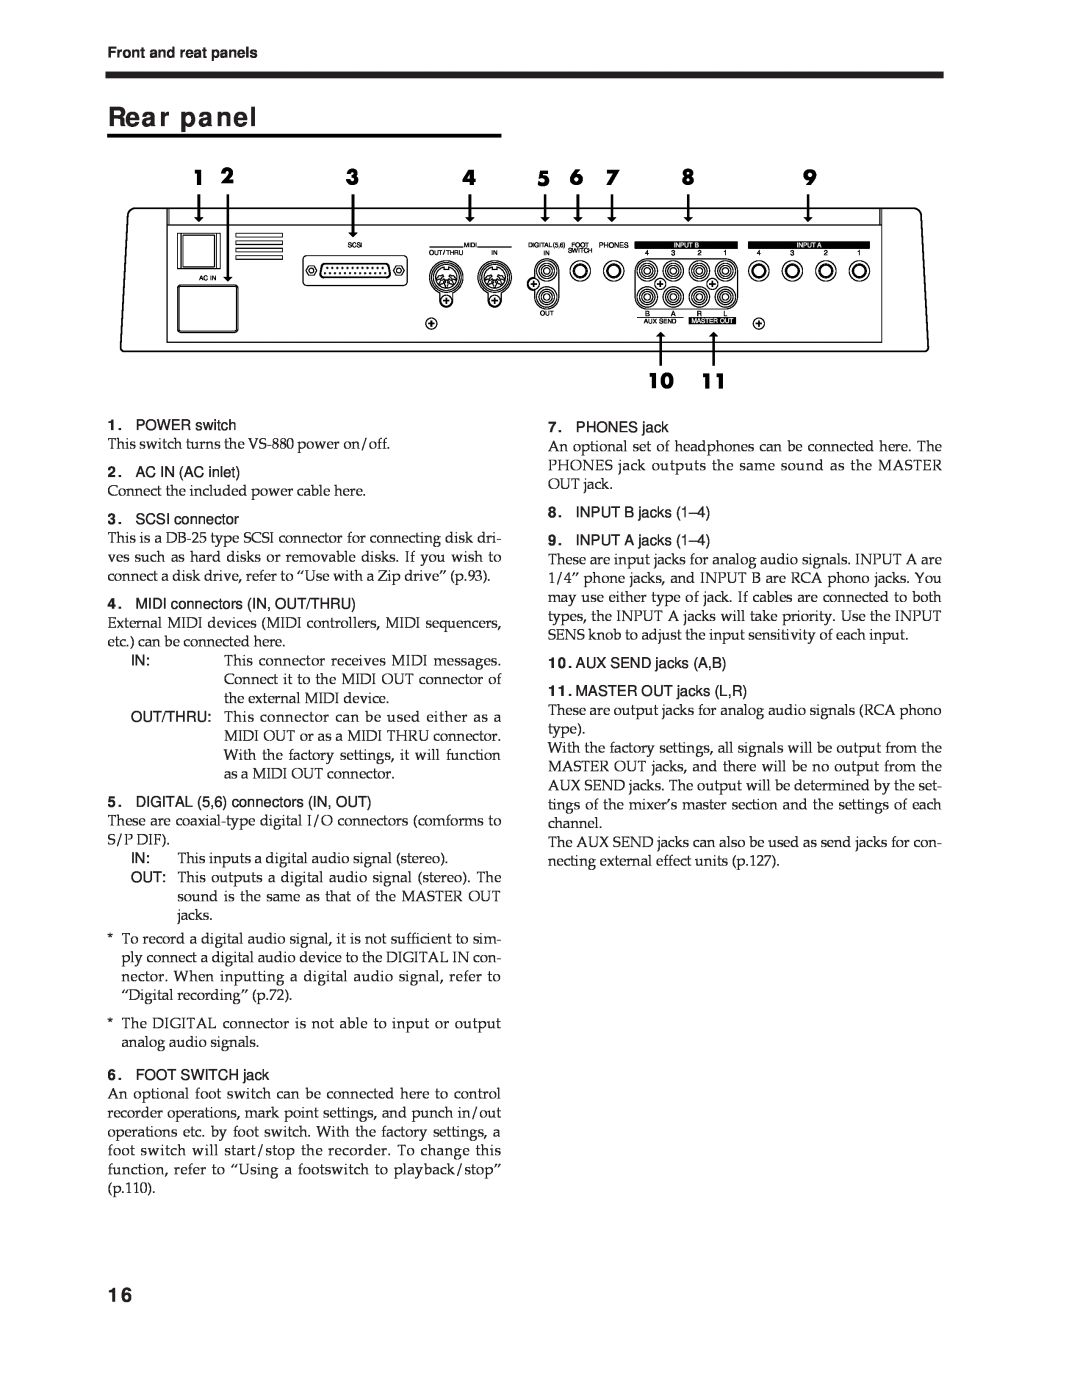 Roland Vs-880 important safety instructions Rear panel 